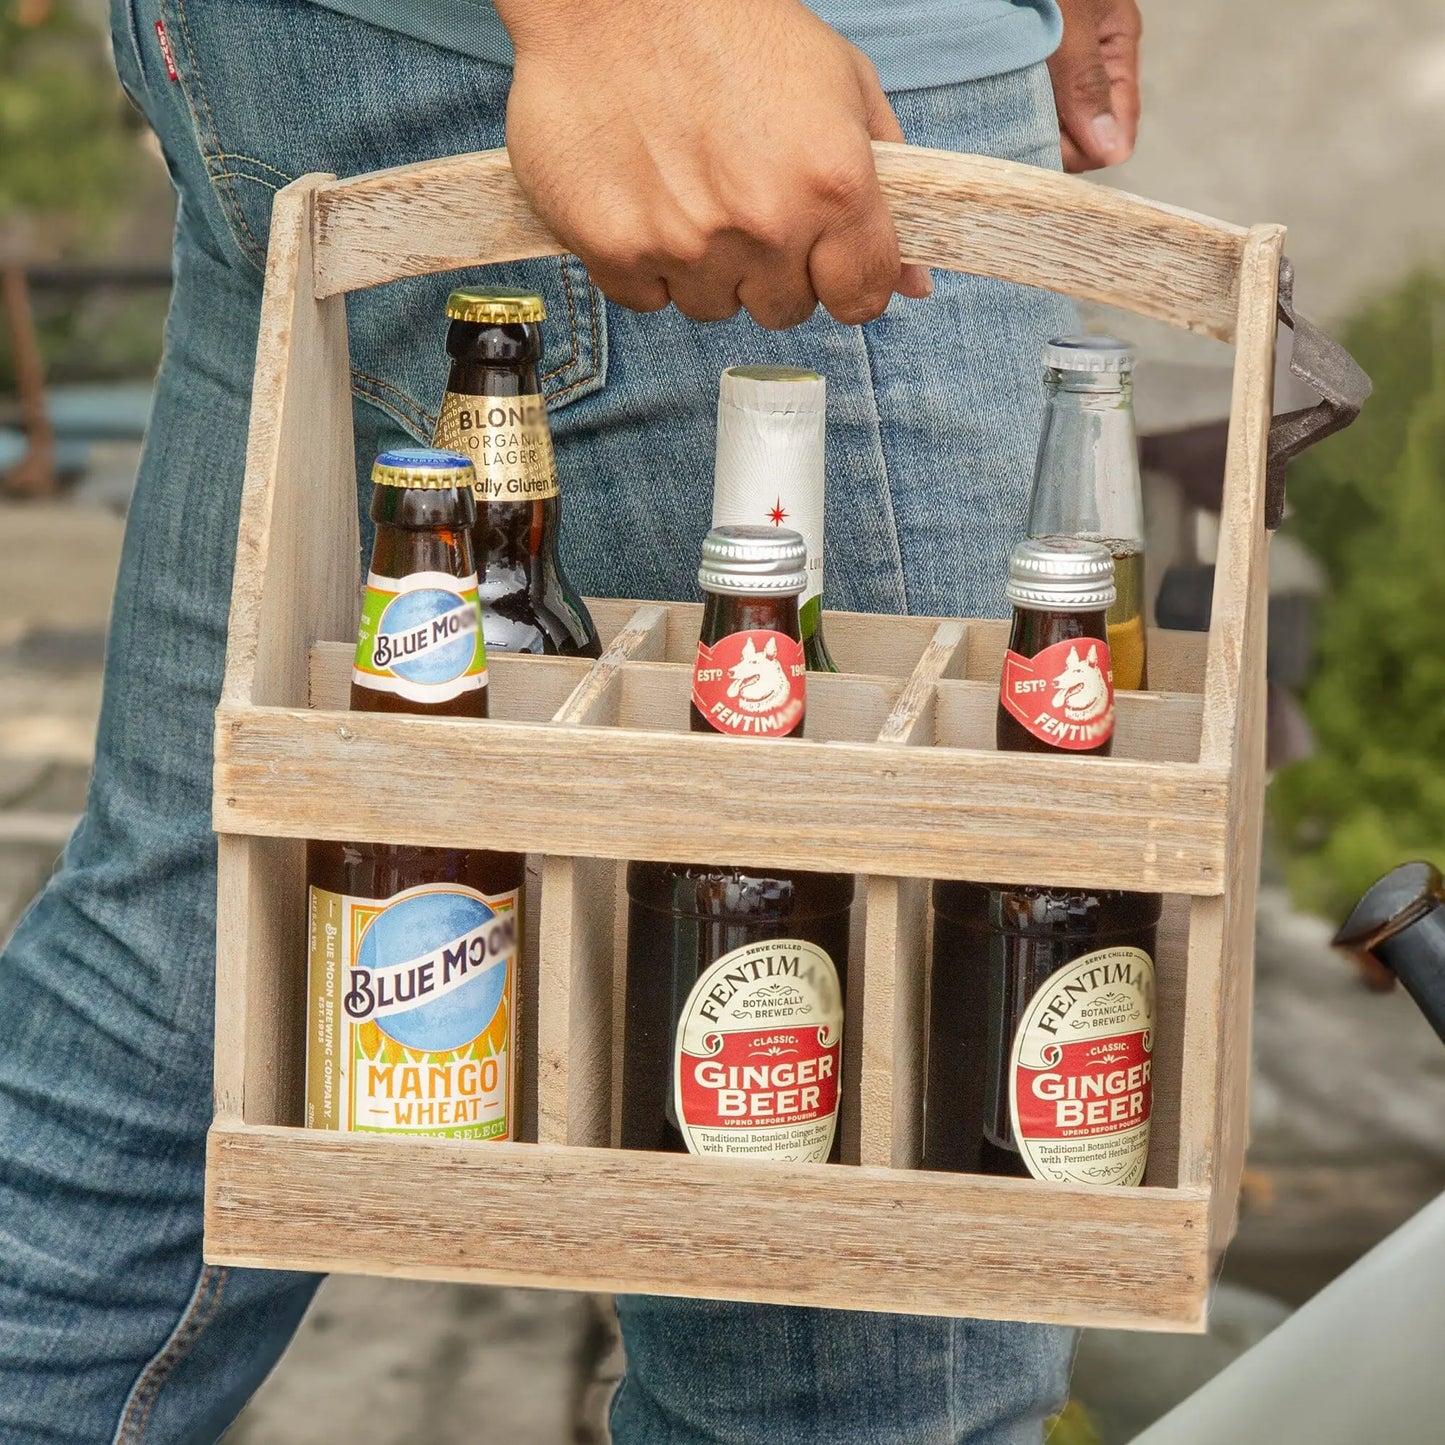 Beer Bottle Caddy with bottled drinks being carried in a garden scene